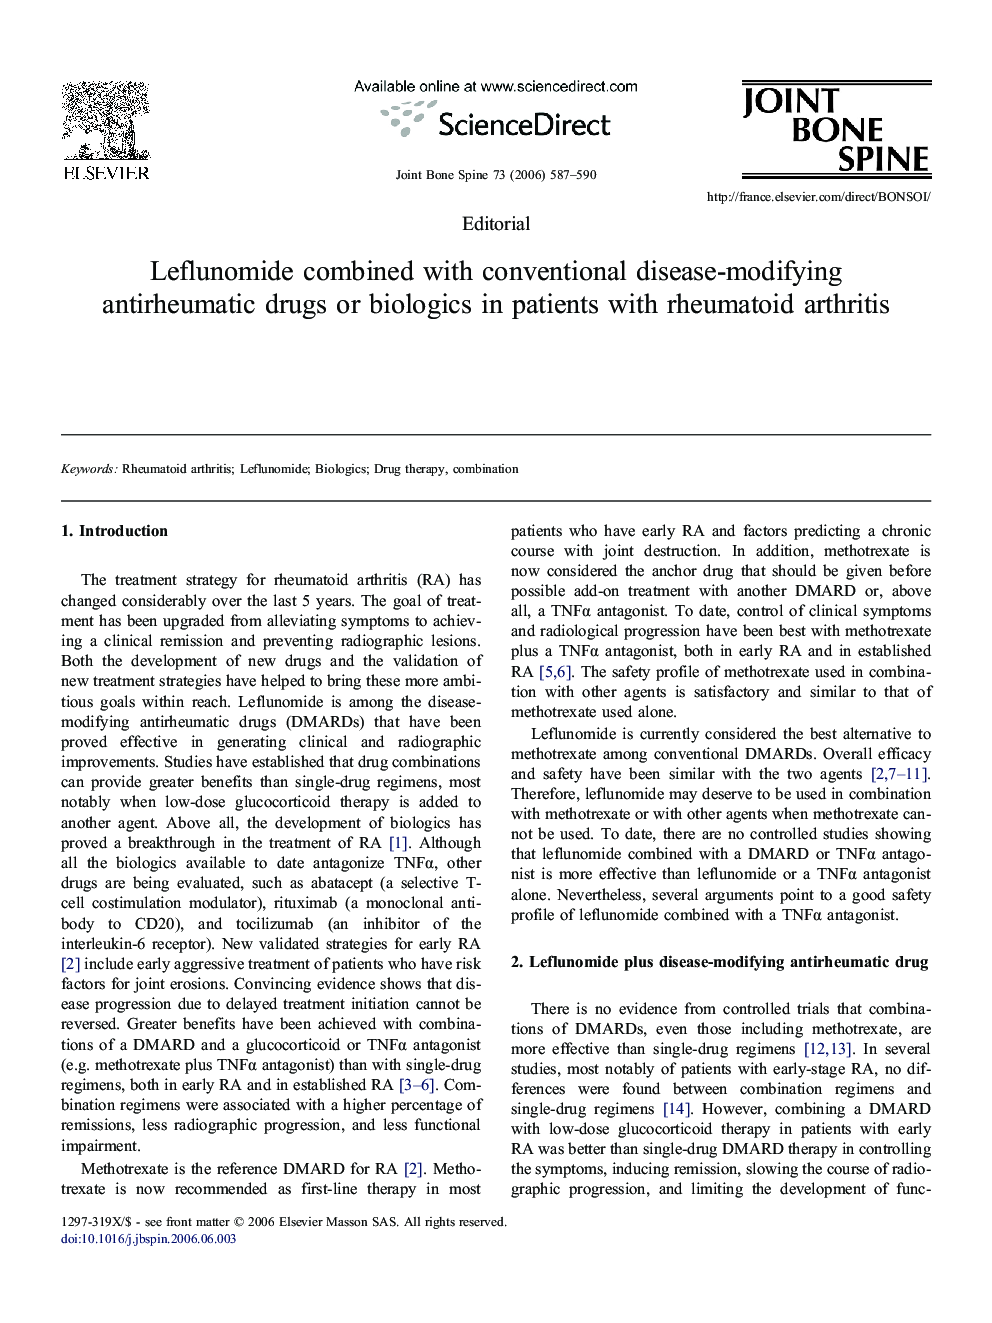 Leflunomide combined with conventional disease-modifying antirheumatic drugs orÂ biologics inÂ patients with rheumatoid arthritis